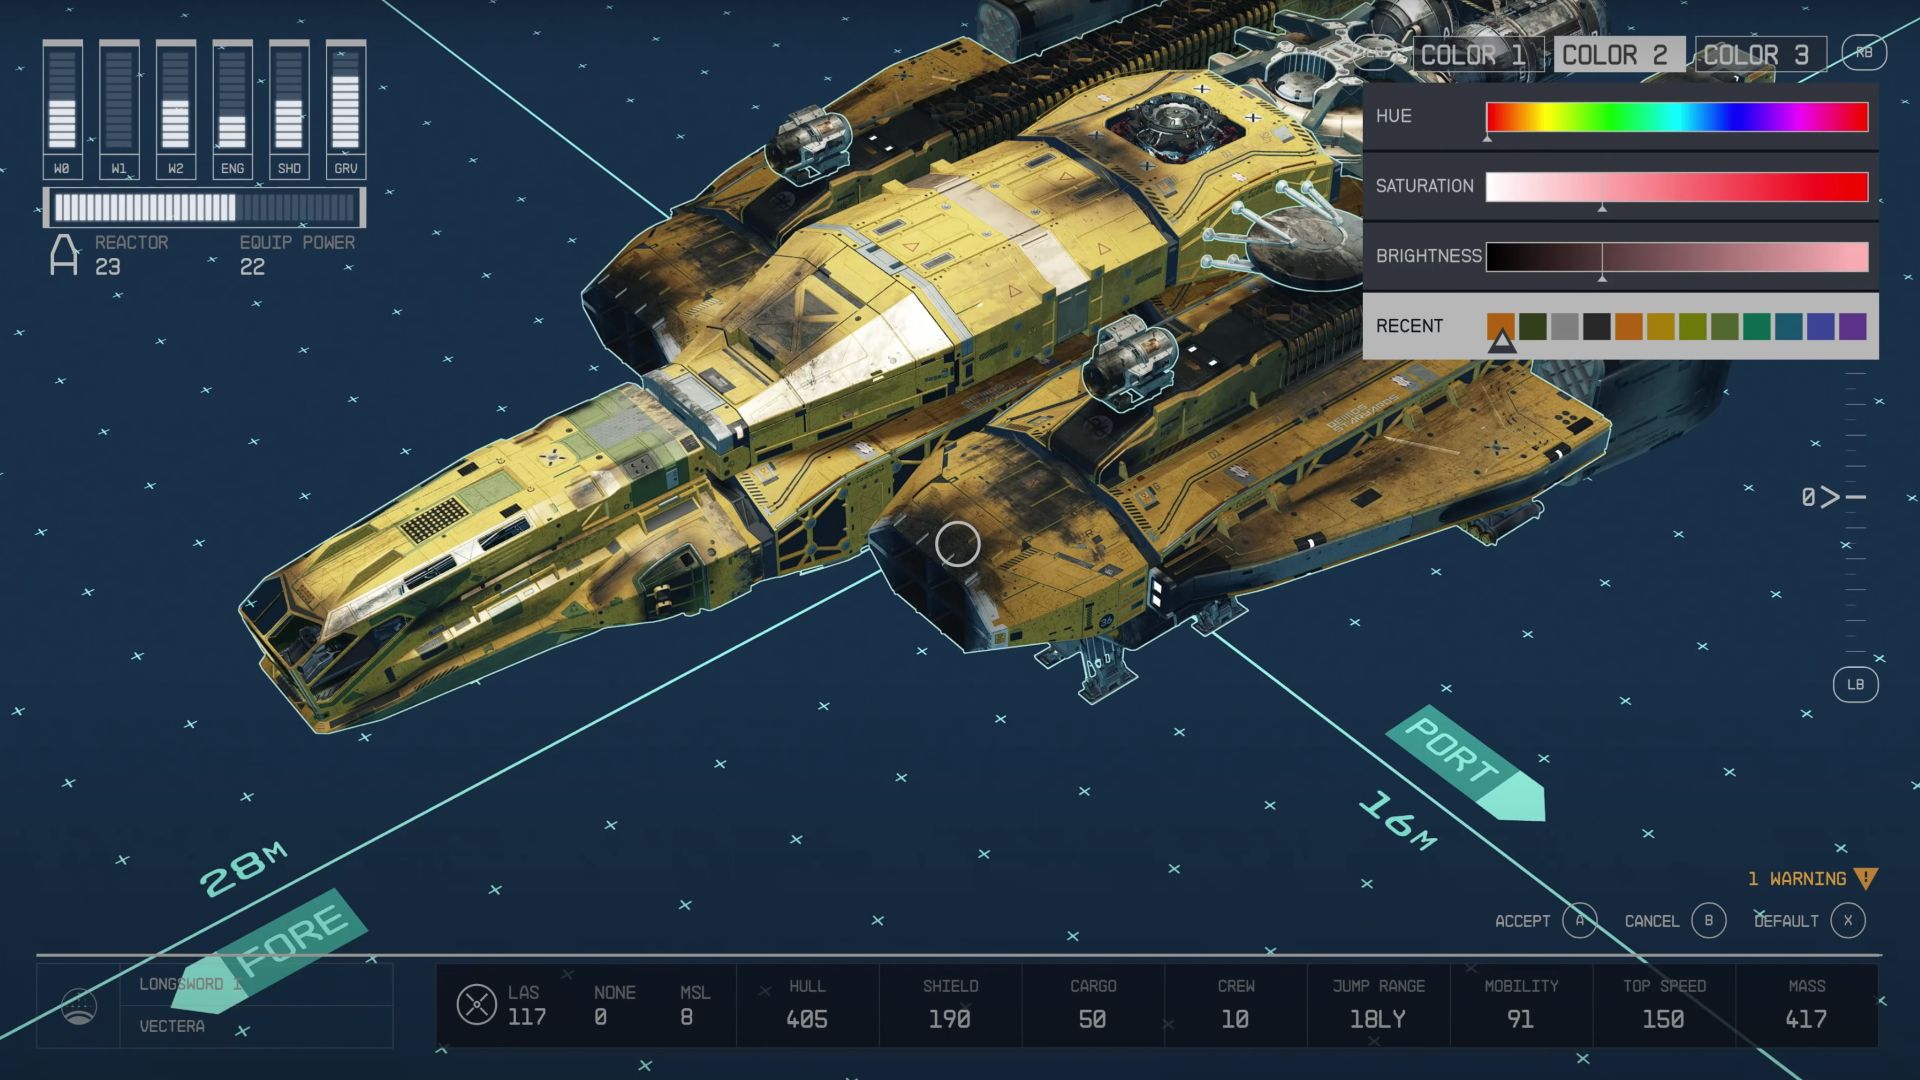 Starfield Ship Customization: The color system can be seen